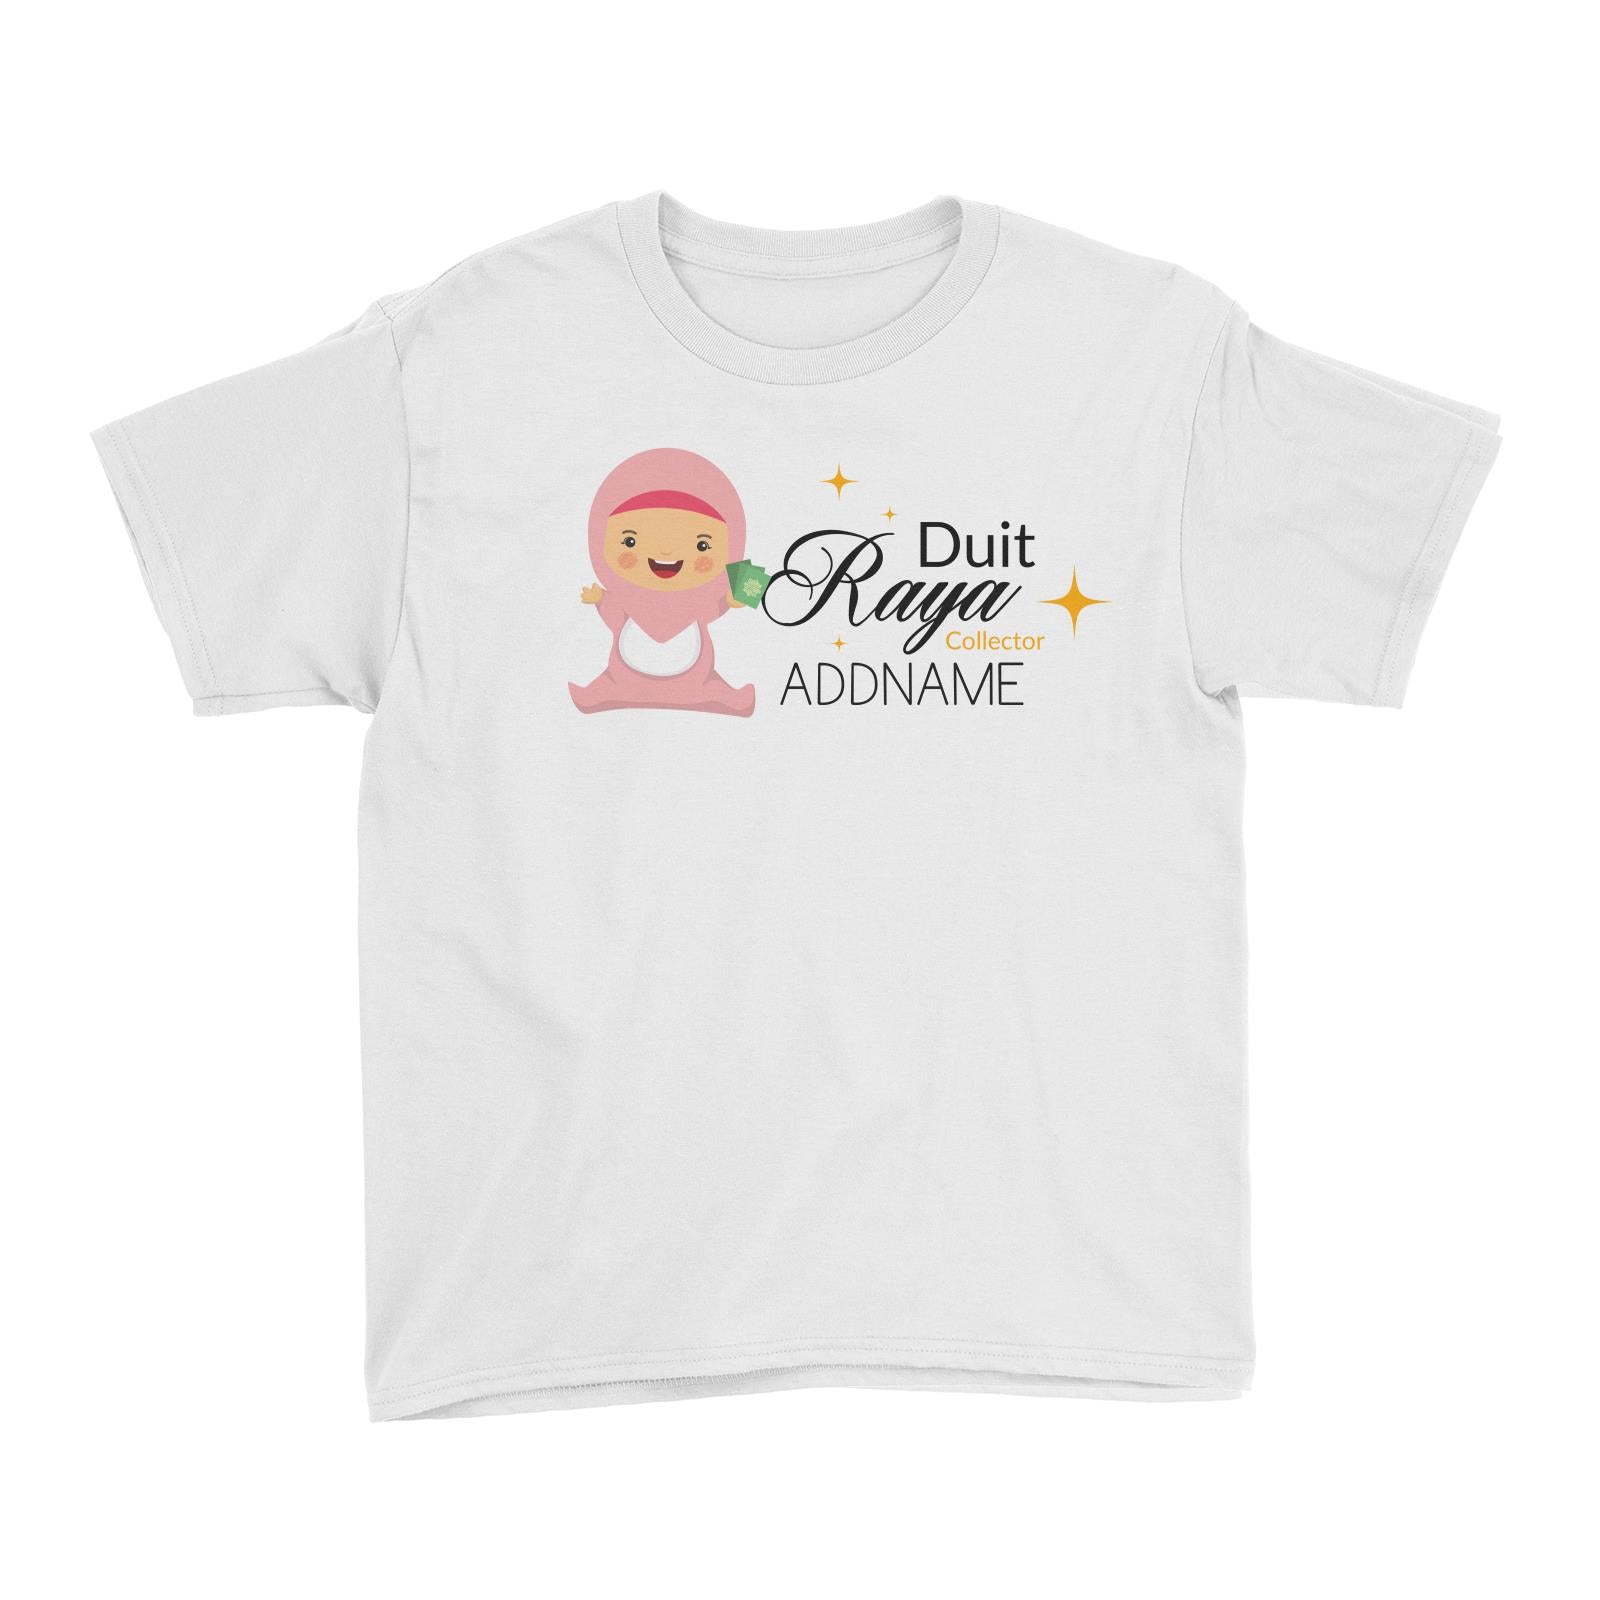 Duit Raya Collector Baby Girl Kid's T-Shirt  Personalizable Designs Sweet Character